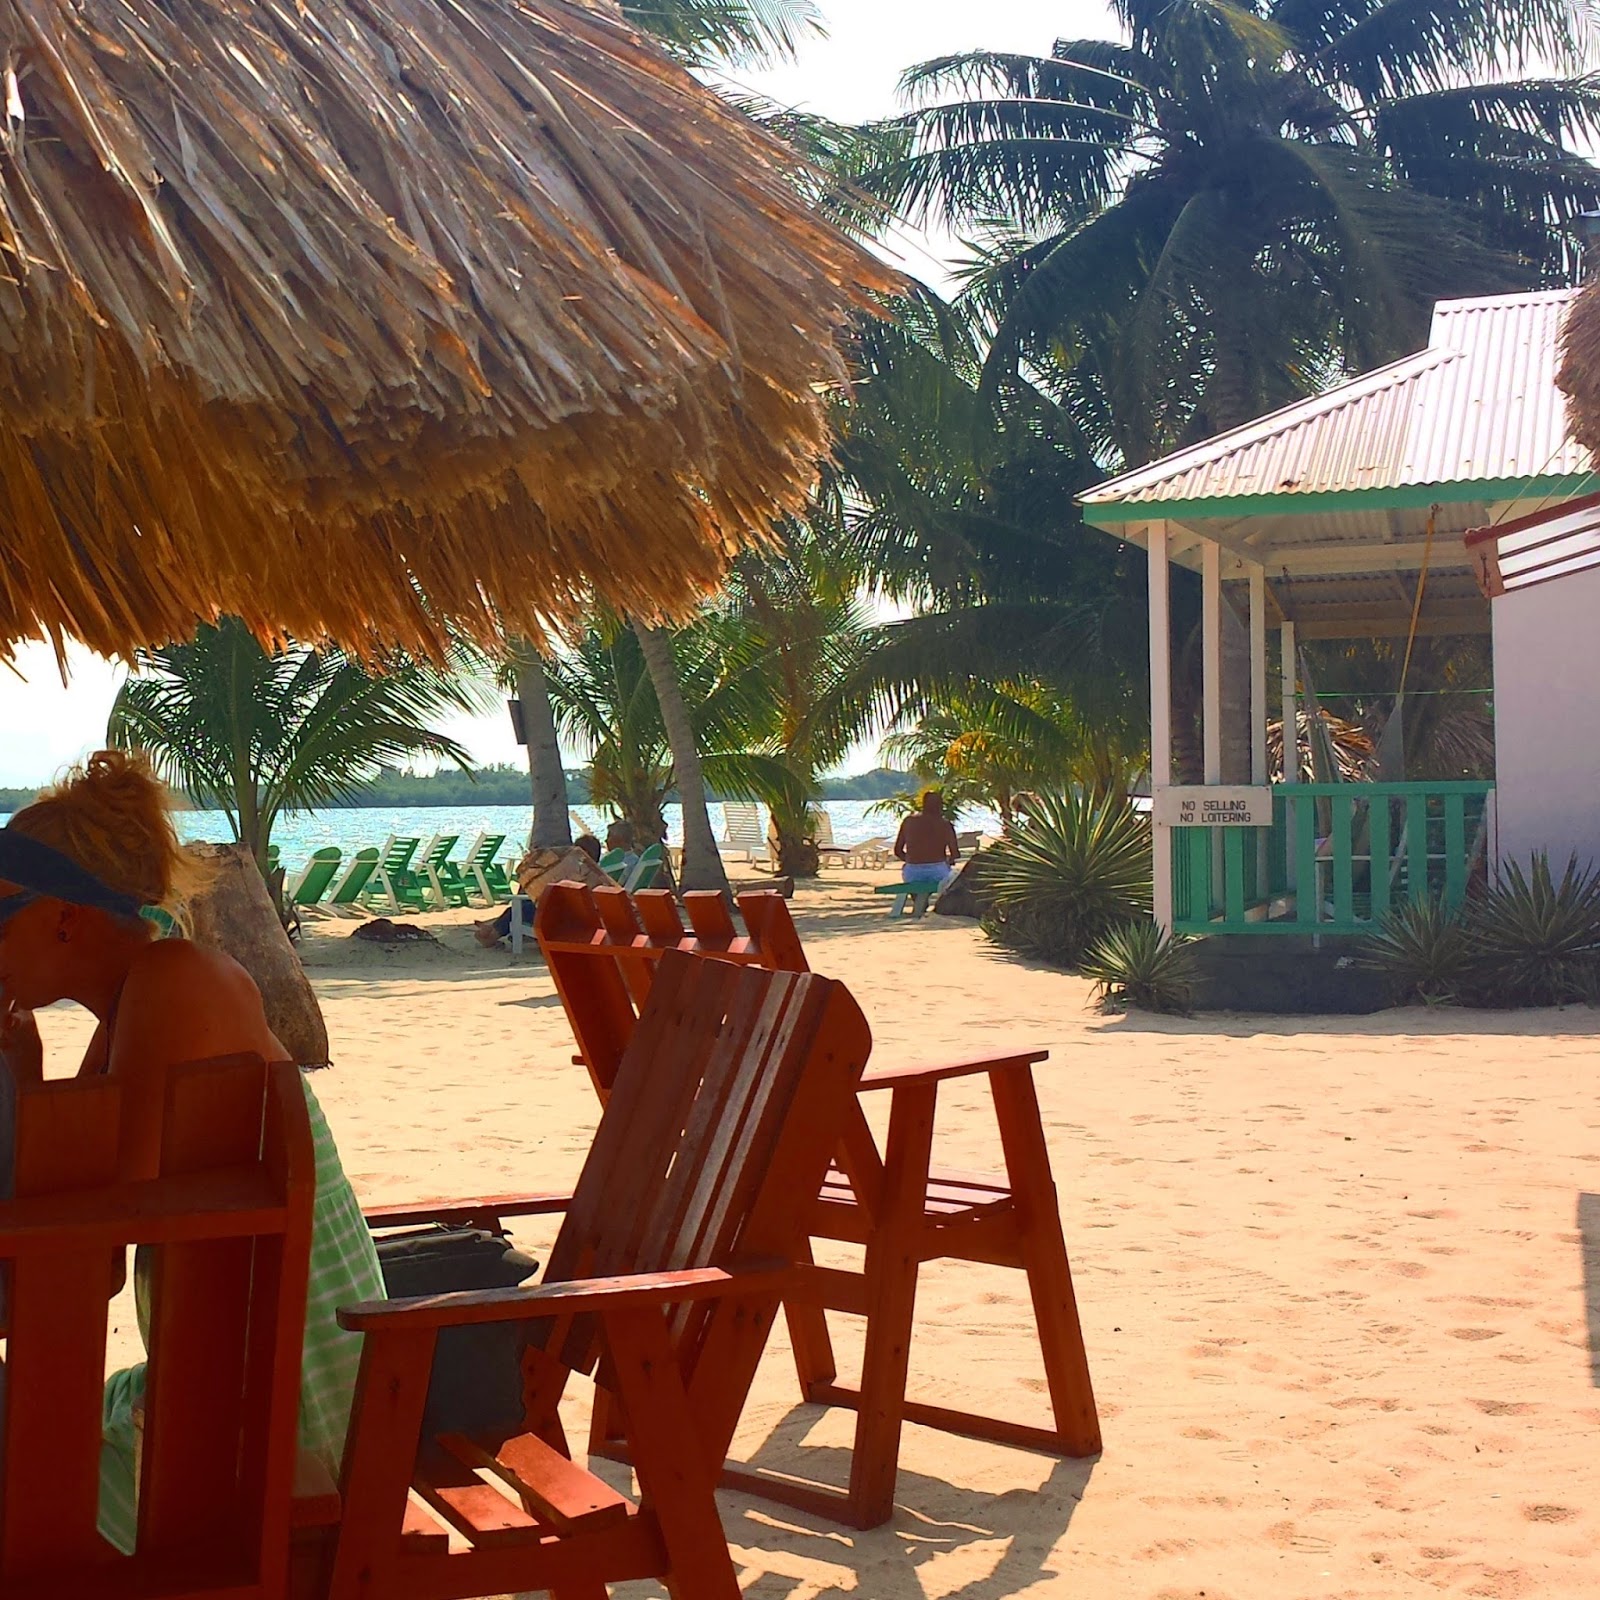 Remax Vip Belize: Starting with breakfast at De'tatch